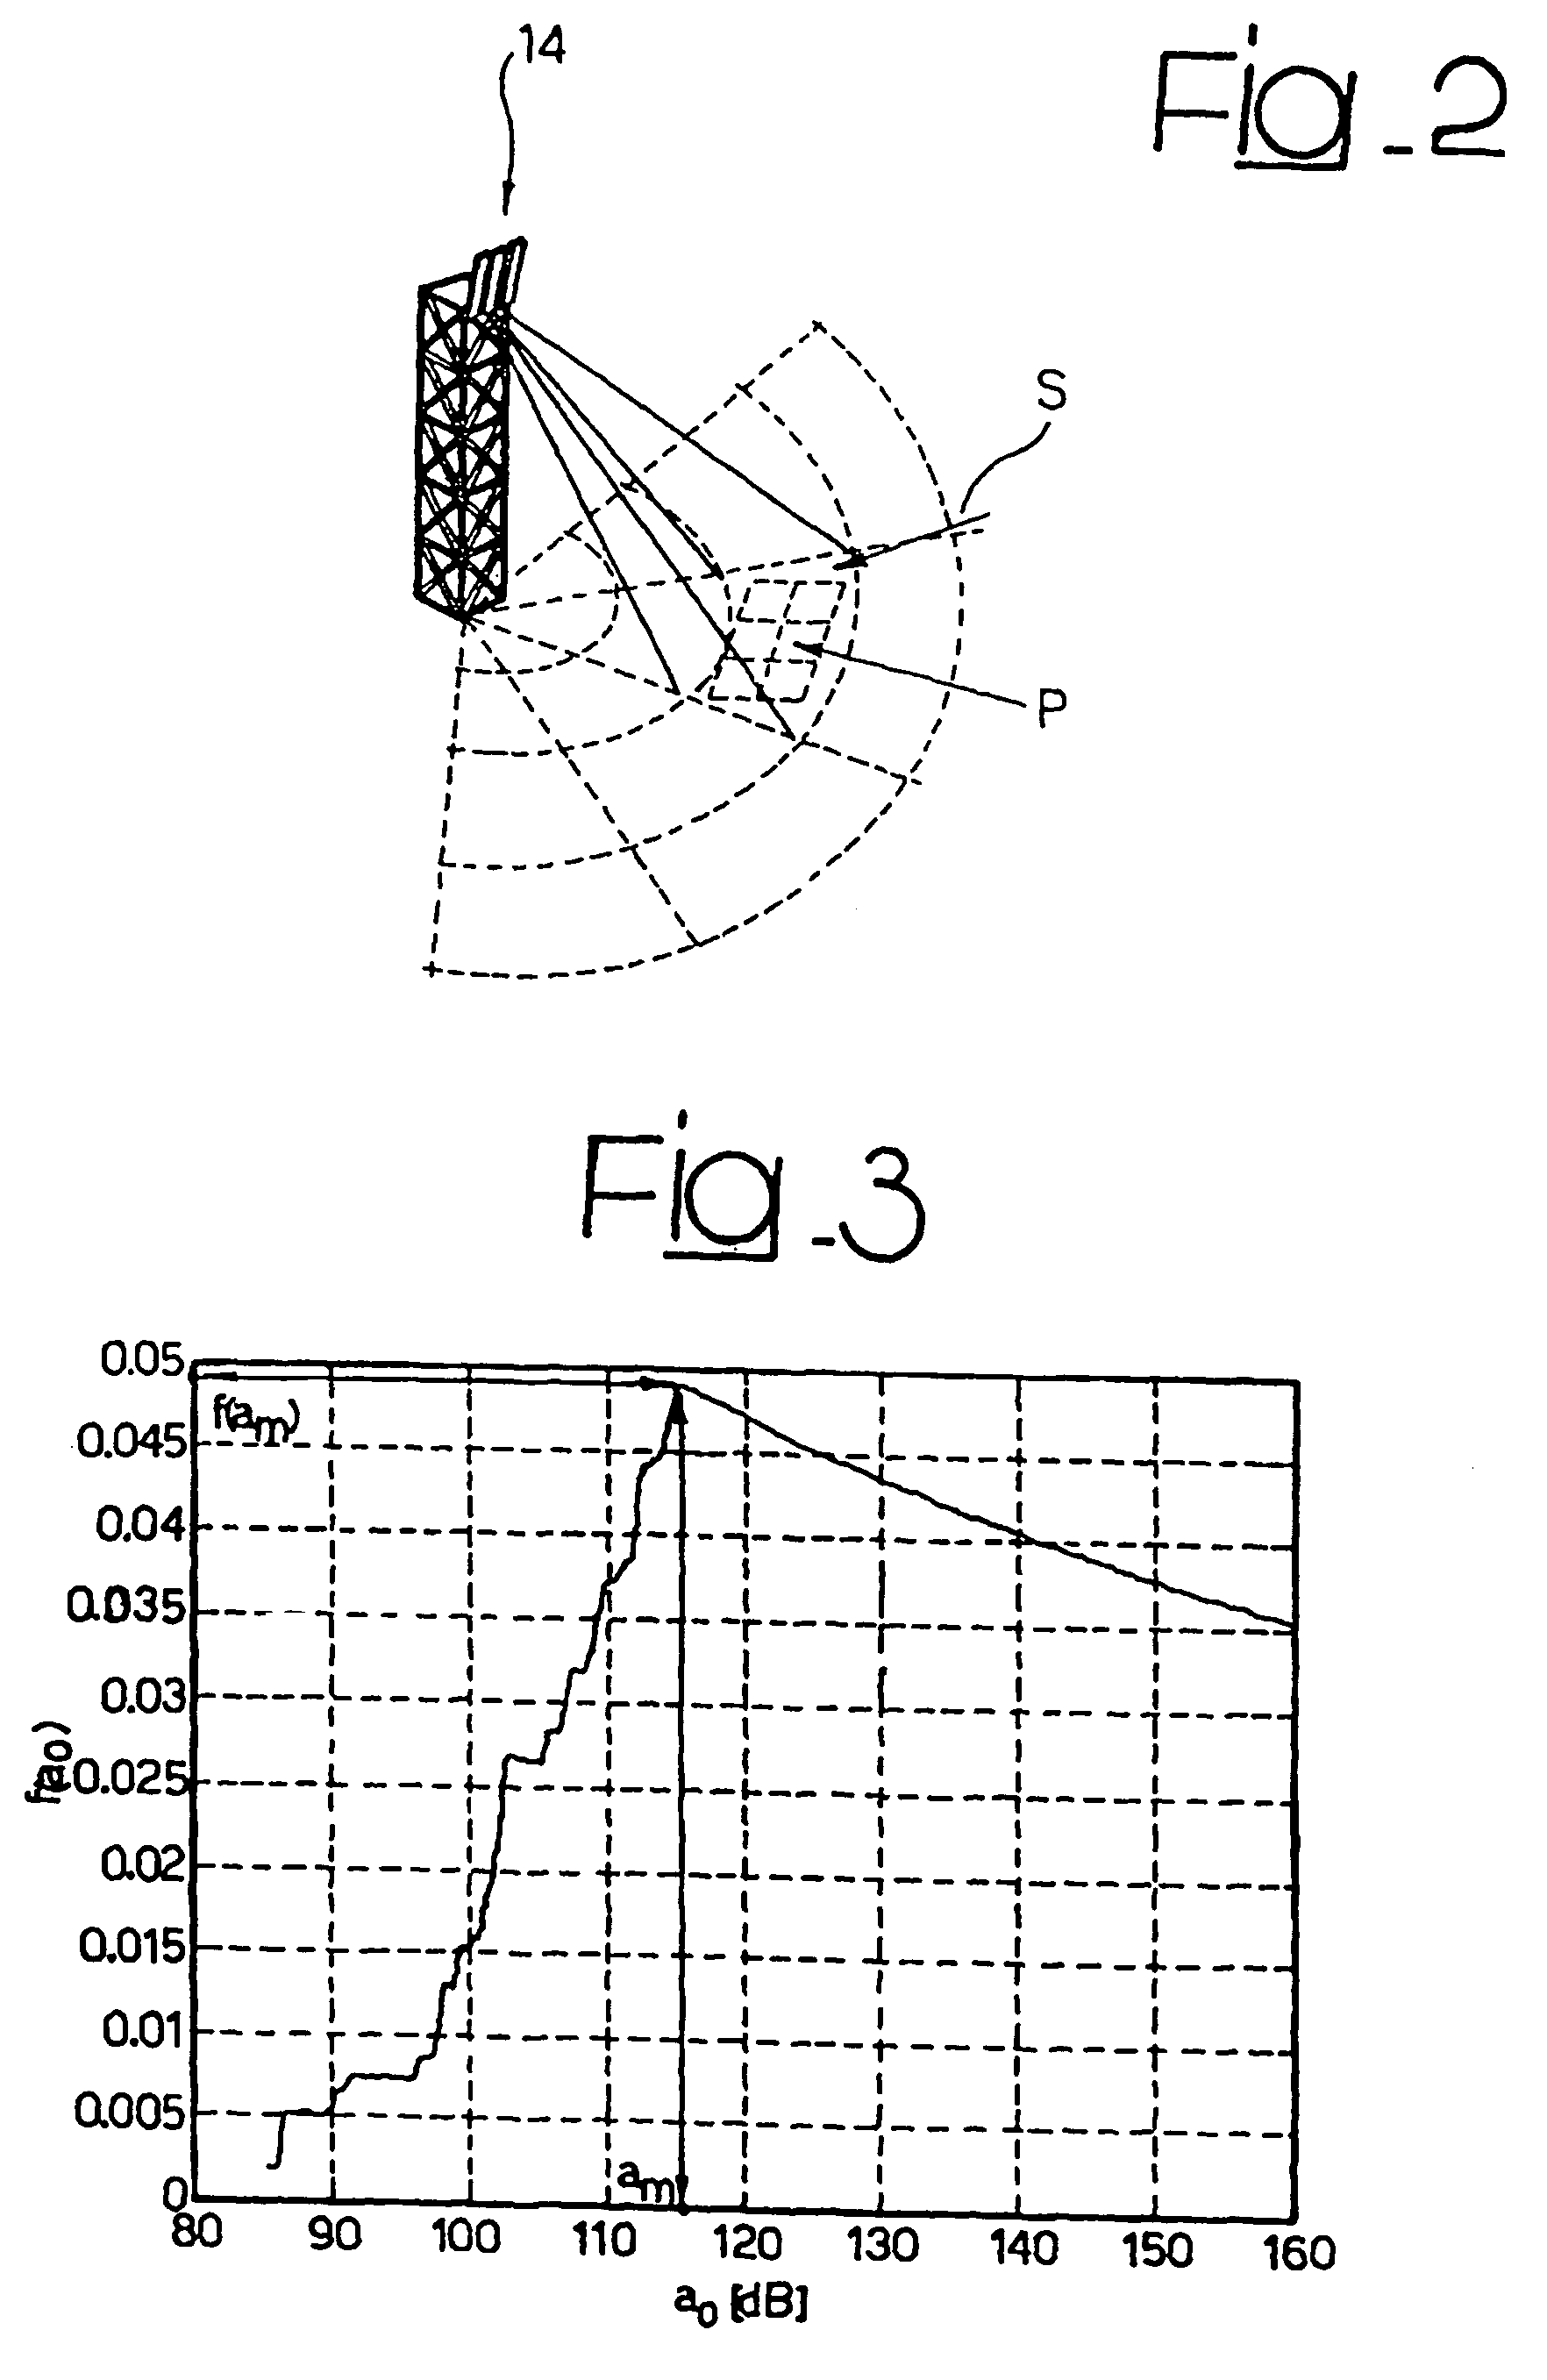 Method for configuring a communication network, related network architecture and computer program product therefor